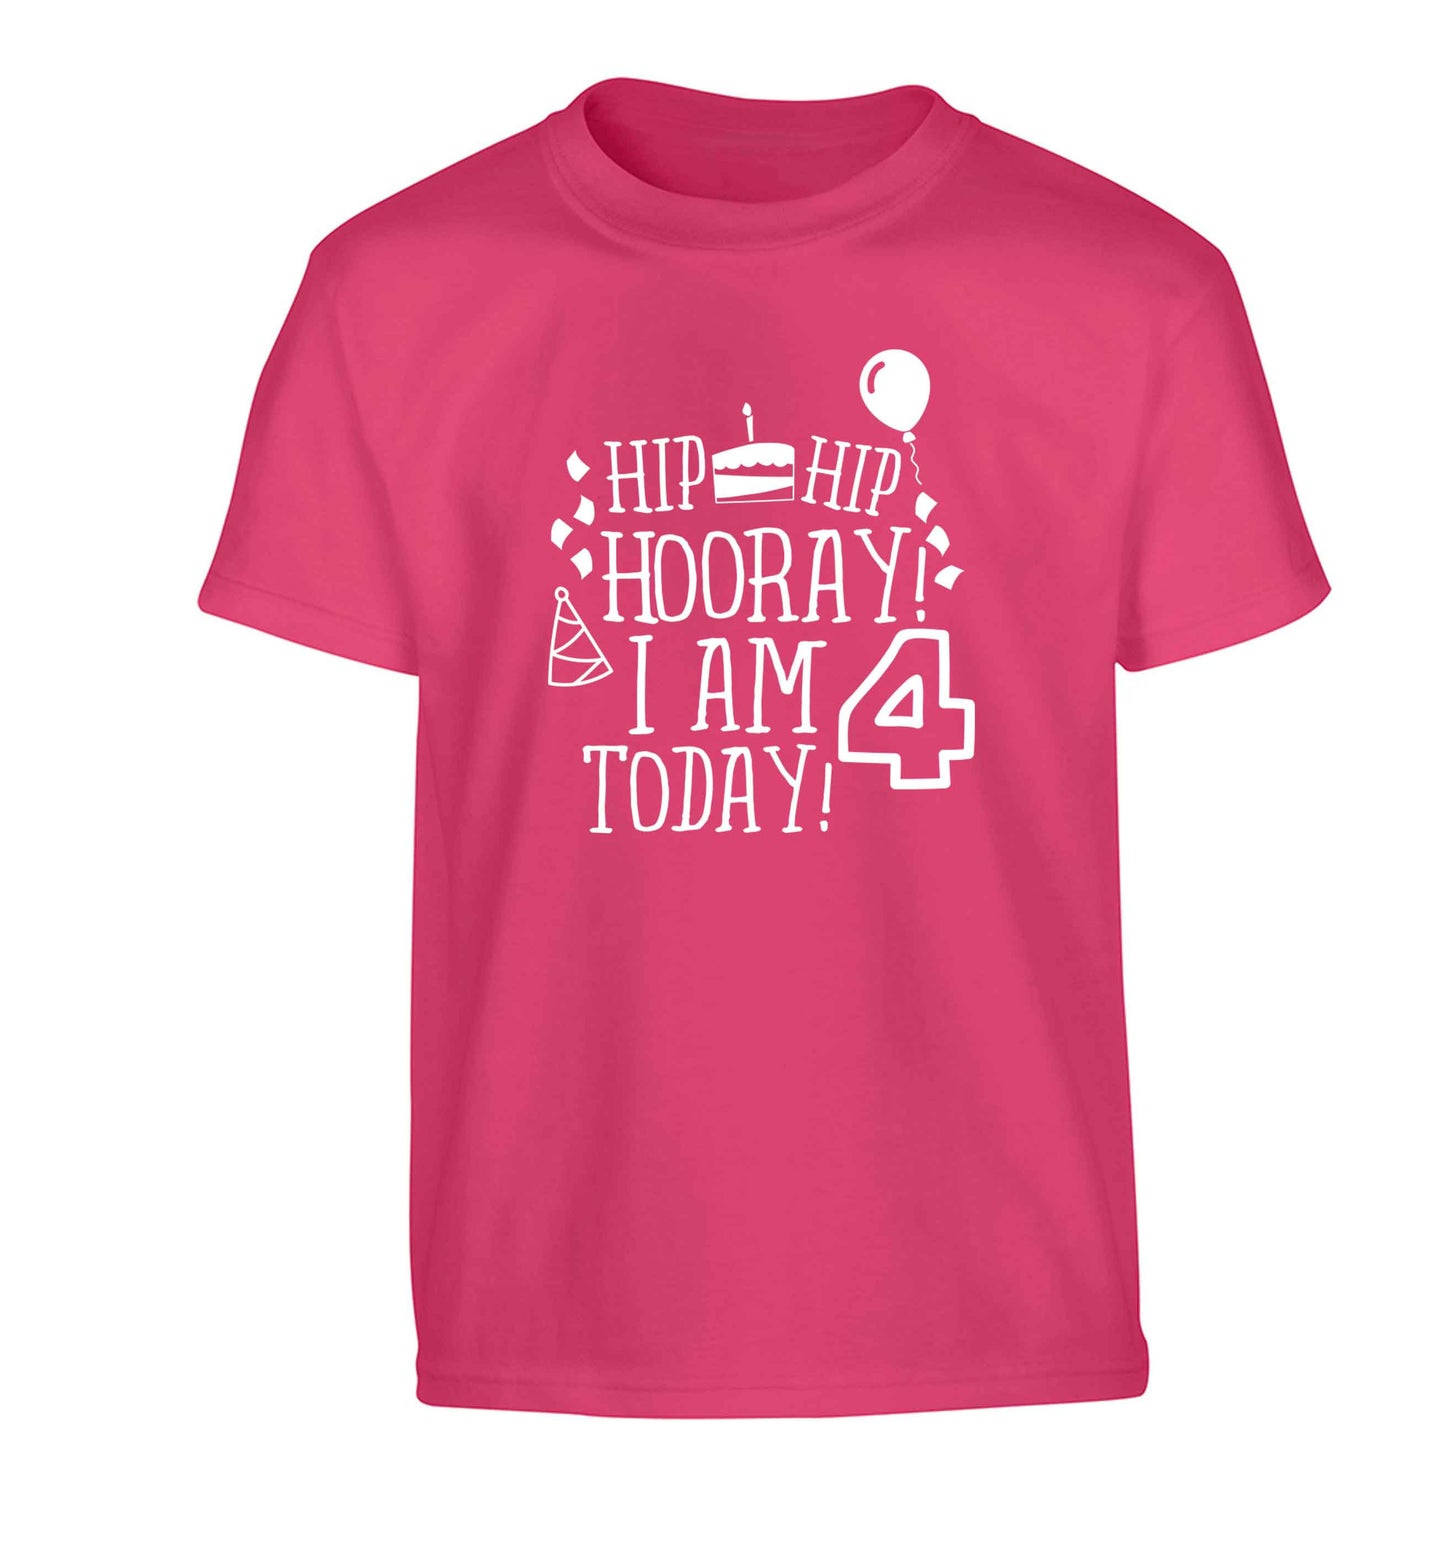 Hip hip hooray I am four today! Children's pink Tshirt 12-13 Years